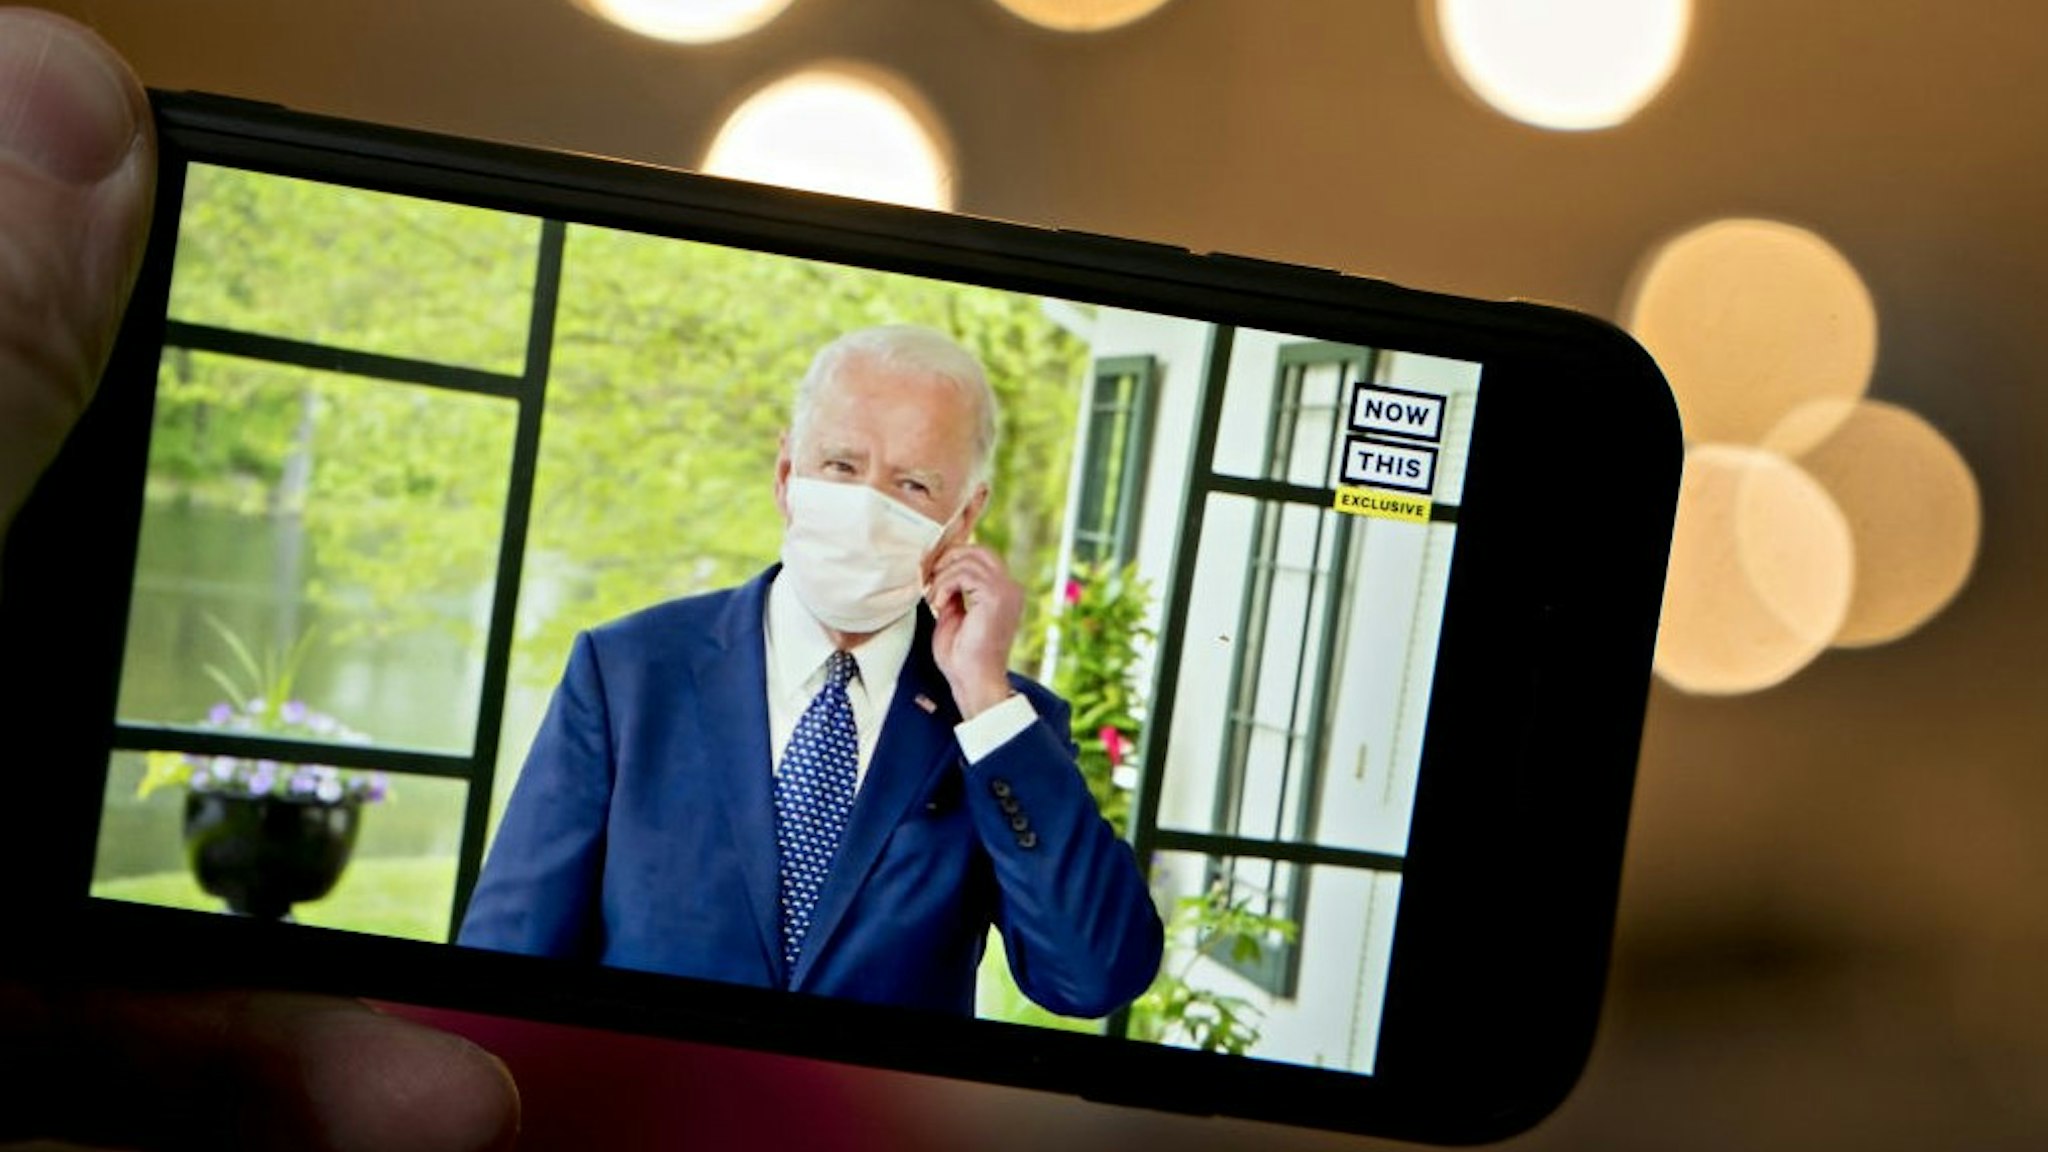 Former Vice President Joe Biden, presumptive Democratic presidential nominee, wears a protective mask during a NowThis economic address seen on a smartphone in Arlington, Virginia, U.S., on Friday, May 8, 2020. A super political action committee backing Joe Biden will launch a $10 million television ad campaign touting the presumptive Democratic nominee's leadership on the economic recovery after the 2008 financial crisis. Photographer: